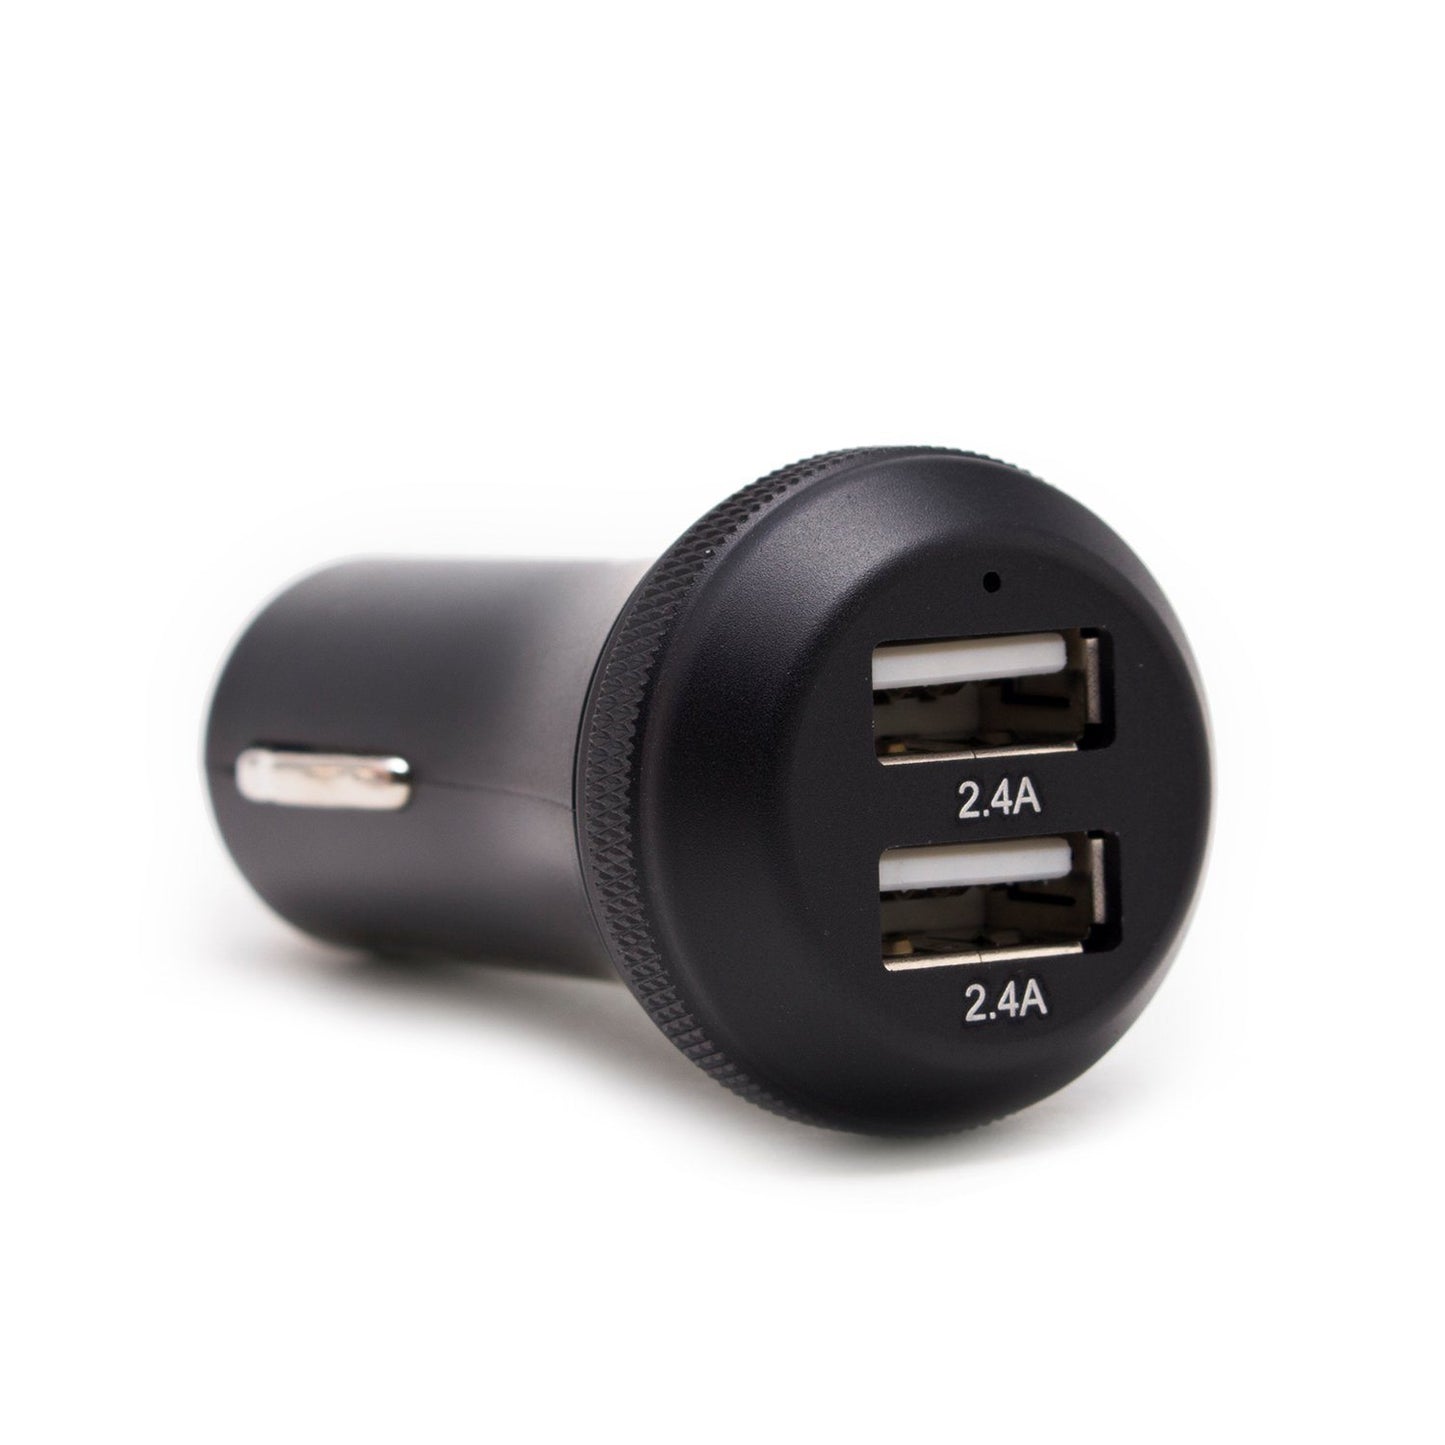 Rockstone Car USB Charger with 2 port 4.8Amp Fast Charge Car Charger Rockstone Black 